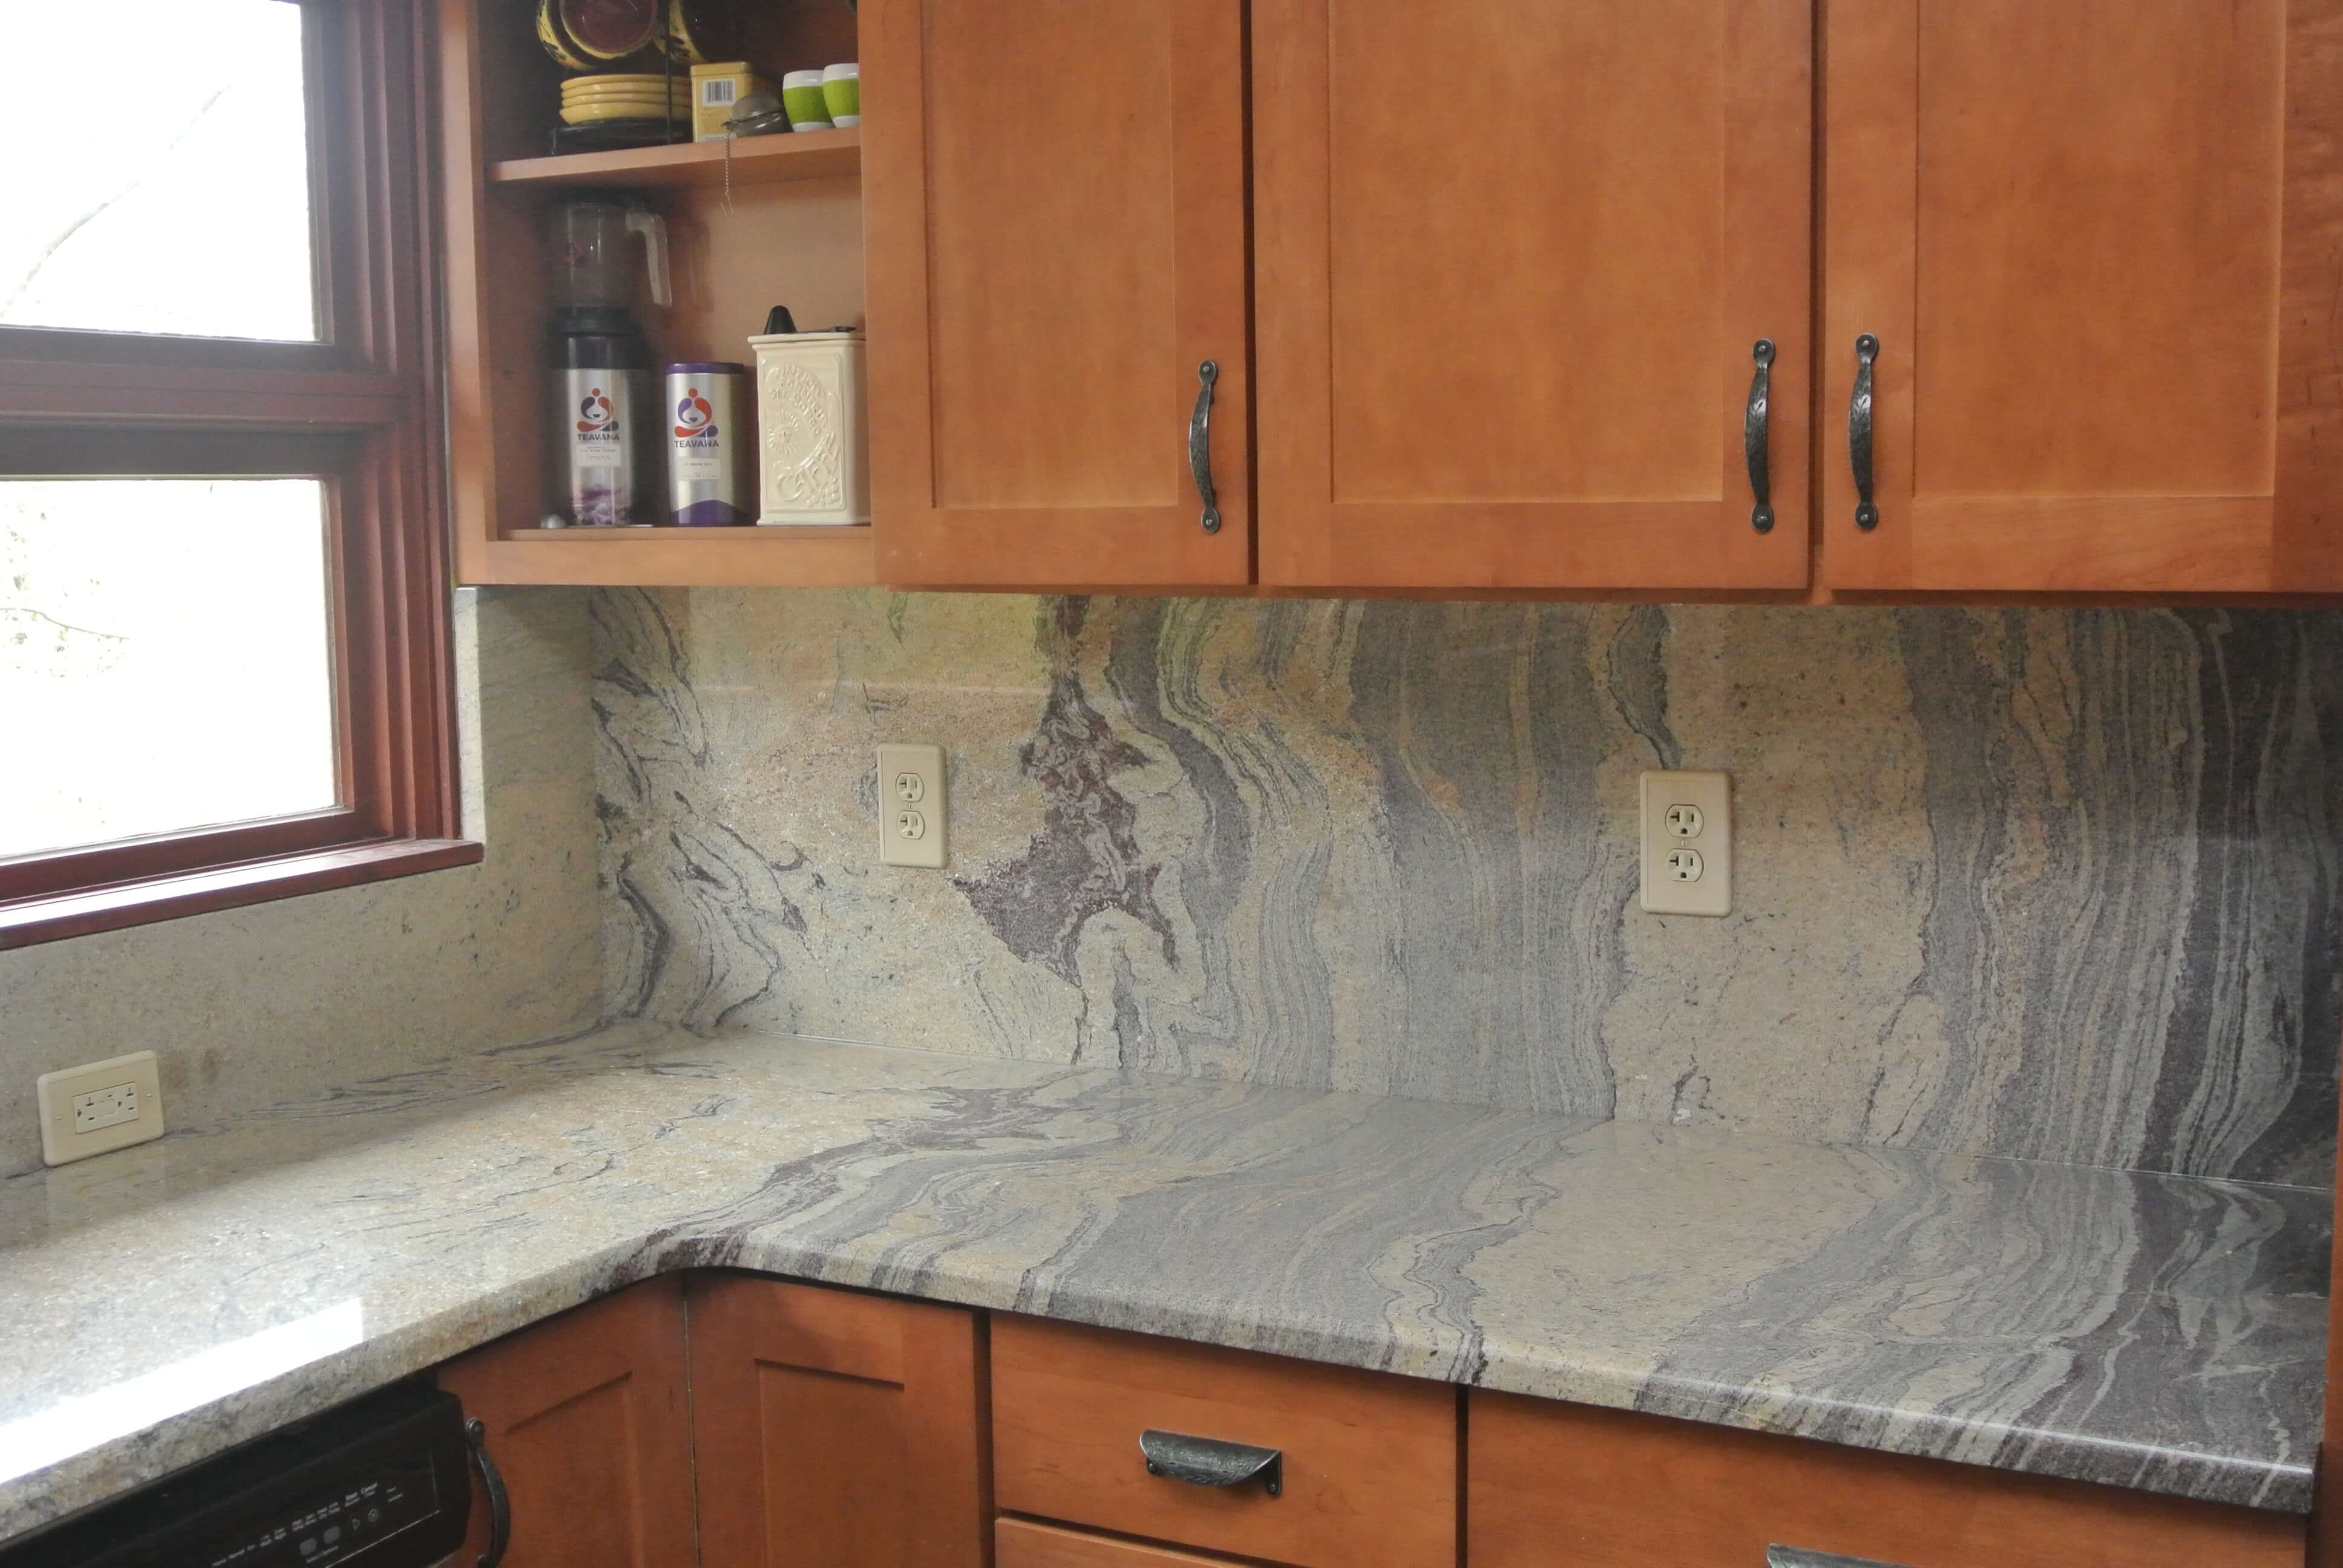 Granite countertops are a centerpiece in this kitchen.